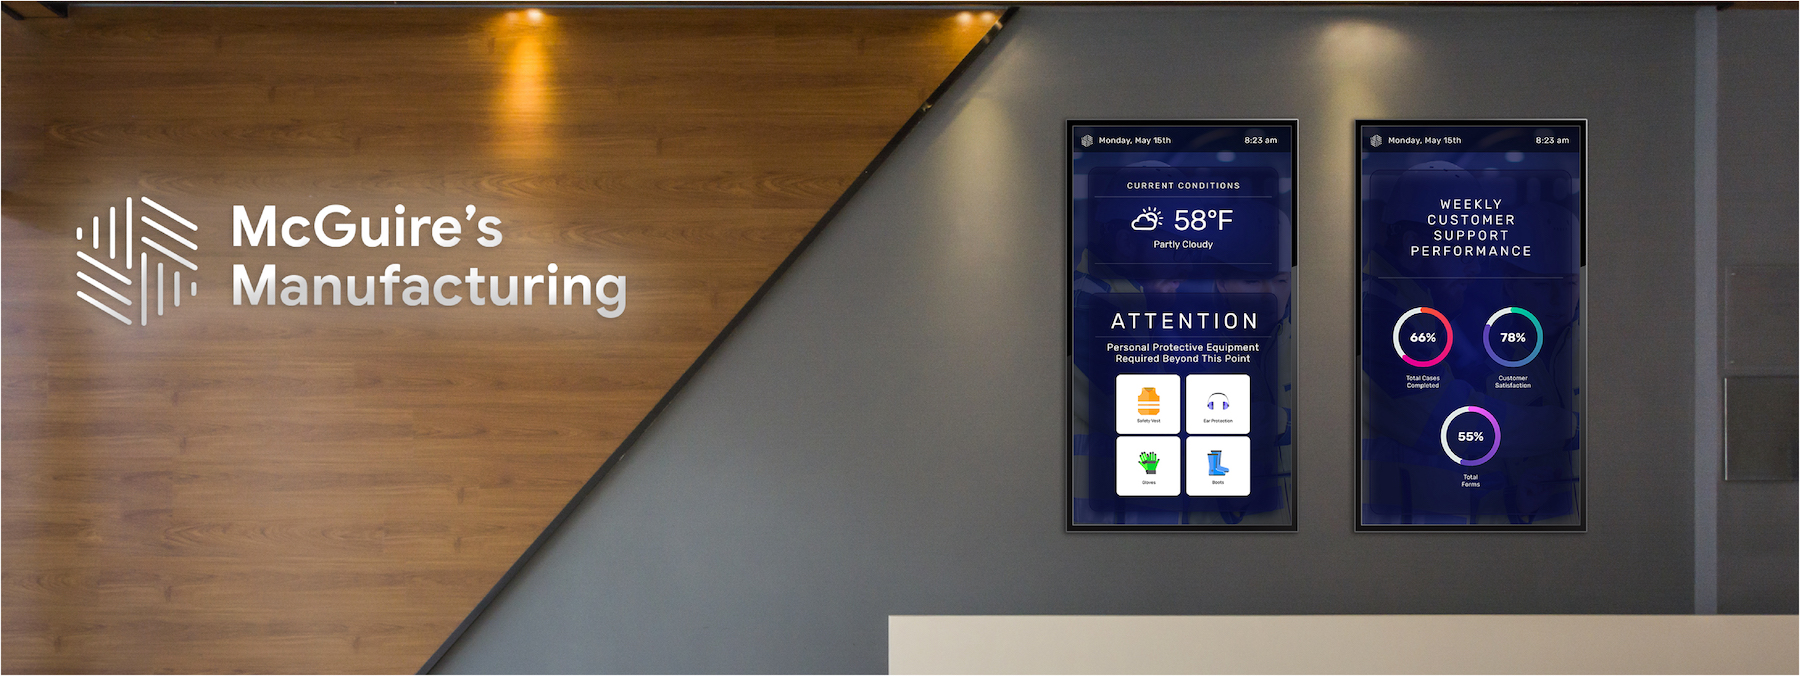 Skykit Digital Signage for Manufacturing - Share Real-Time Dashboard and important Safety Information with Your Staff - App Deployment Solutions